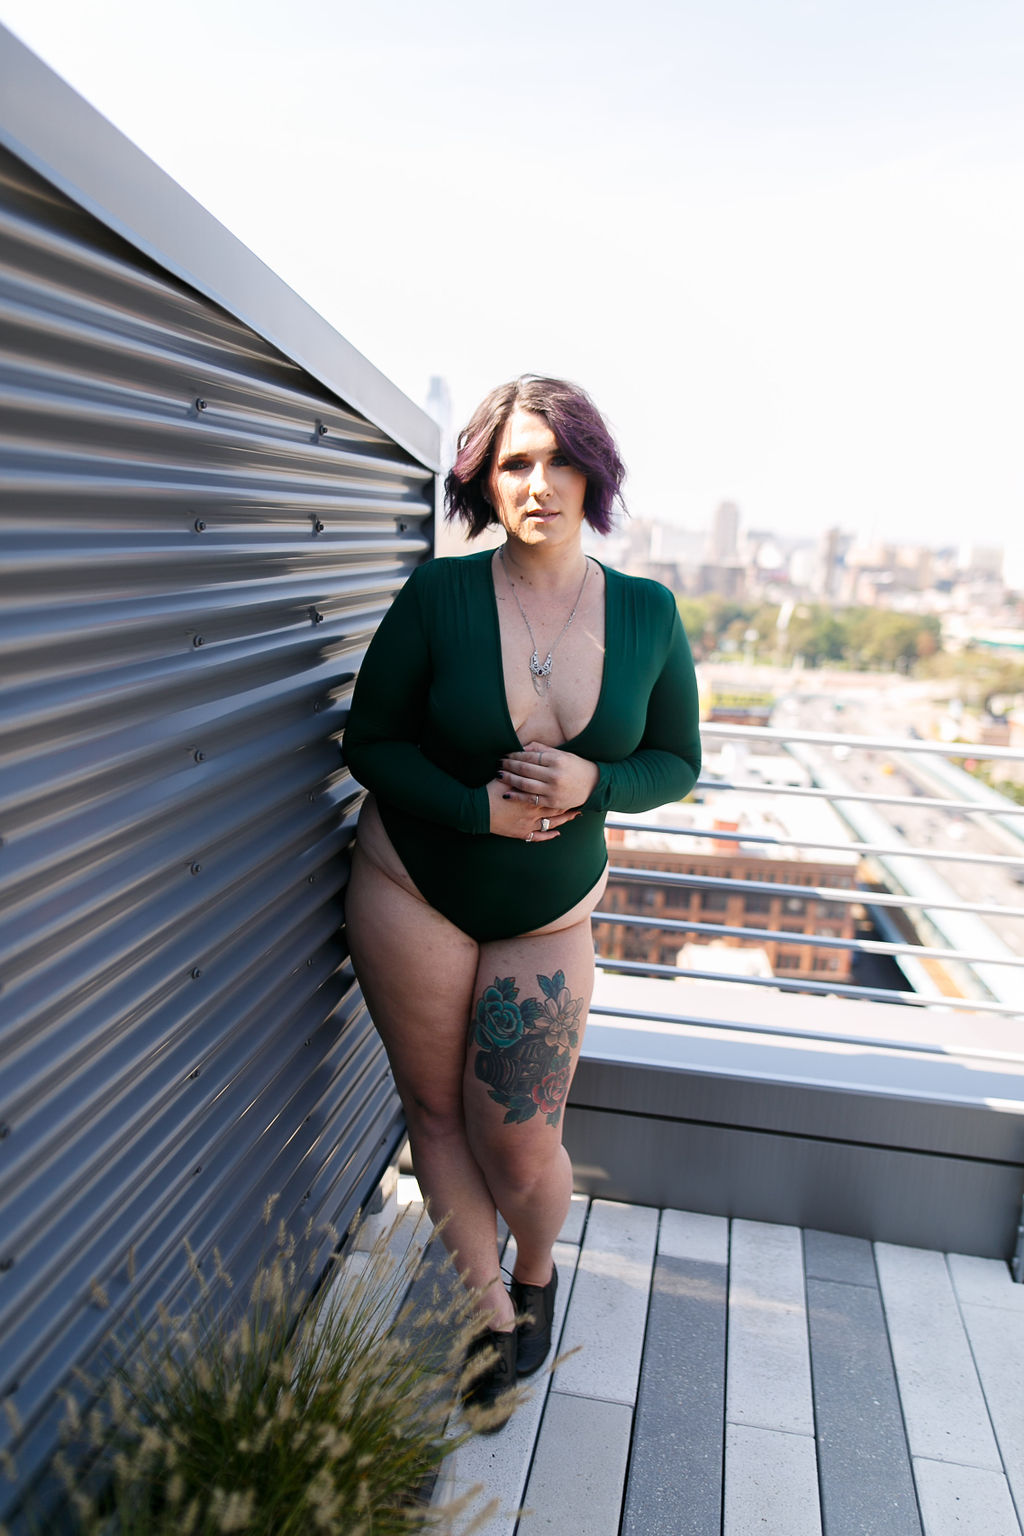 Philly Outdoor Rooftop Boudoir Session by Swiger Photography 8.jpg